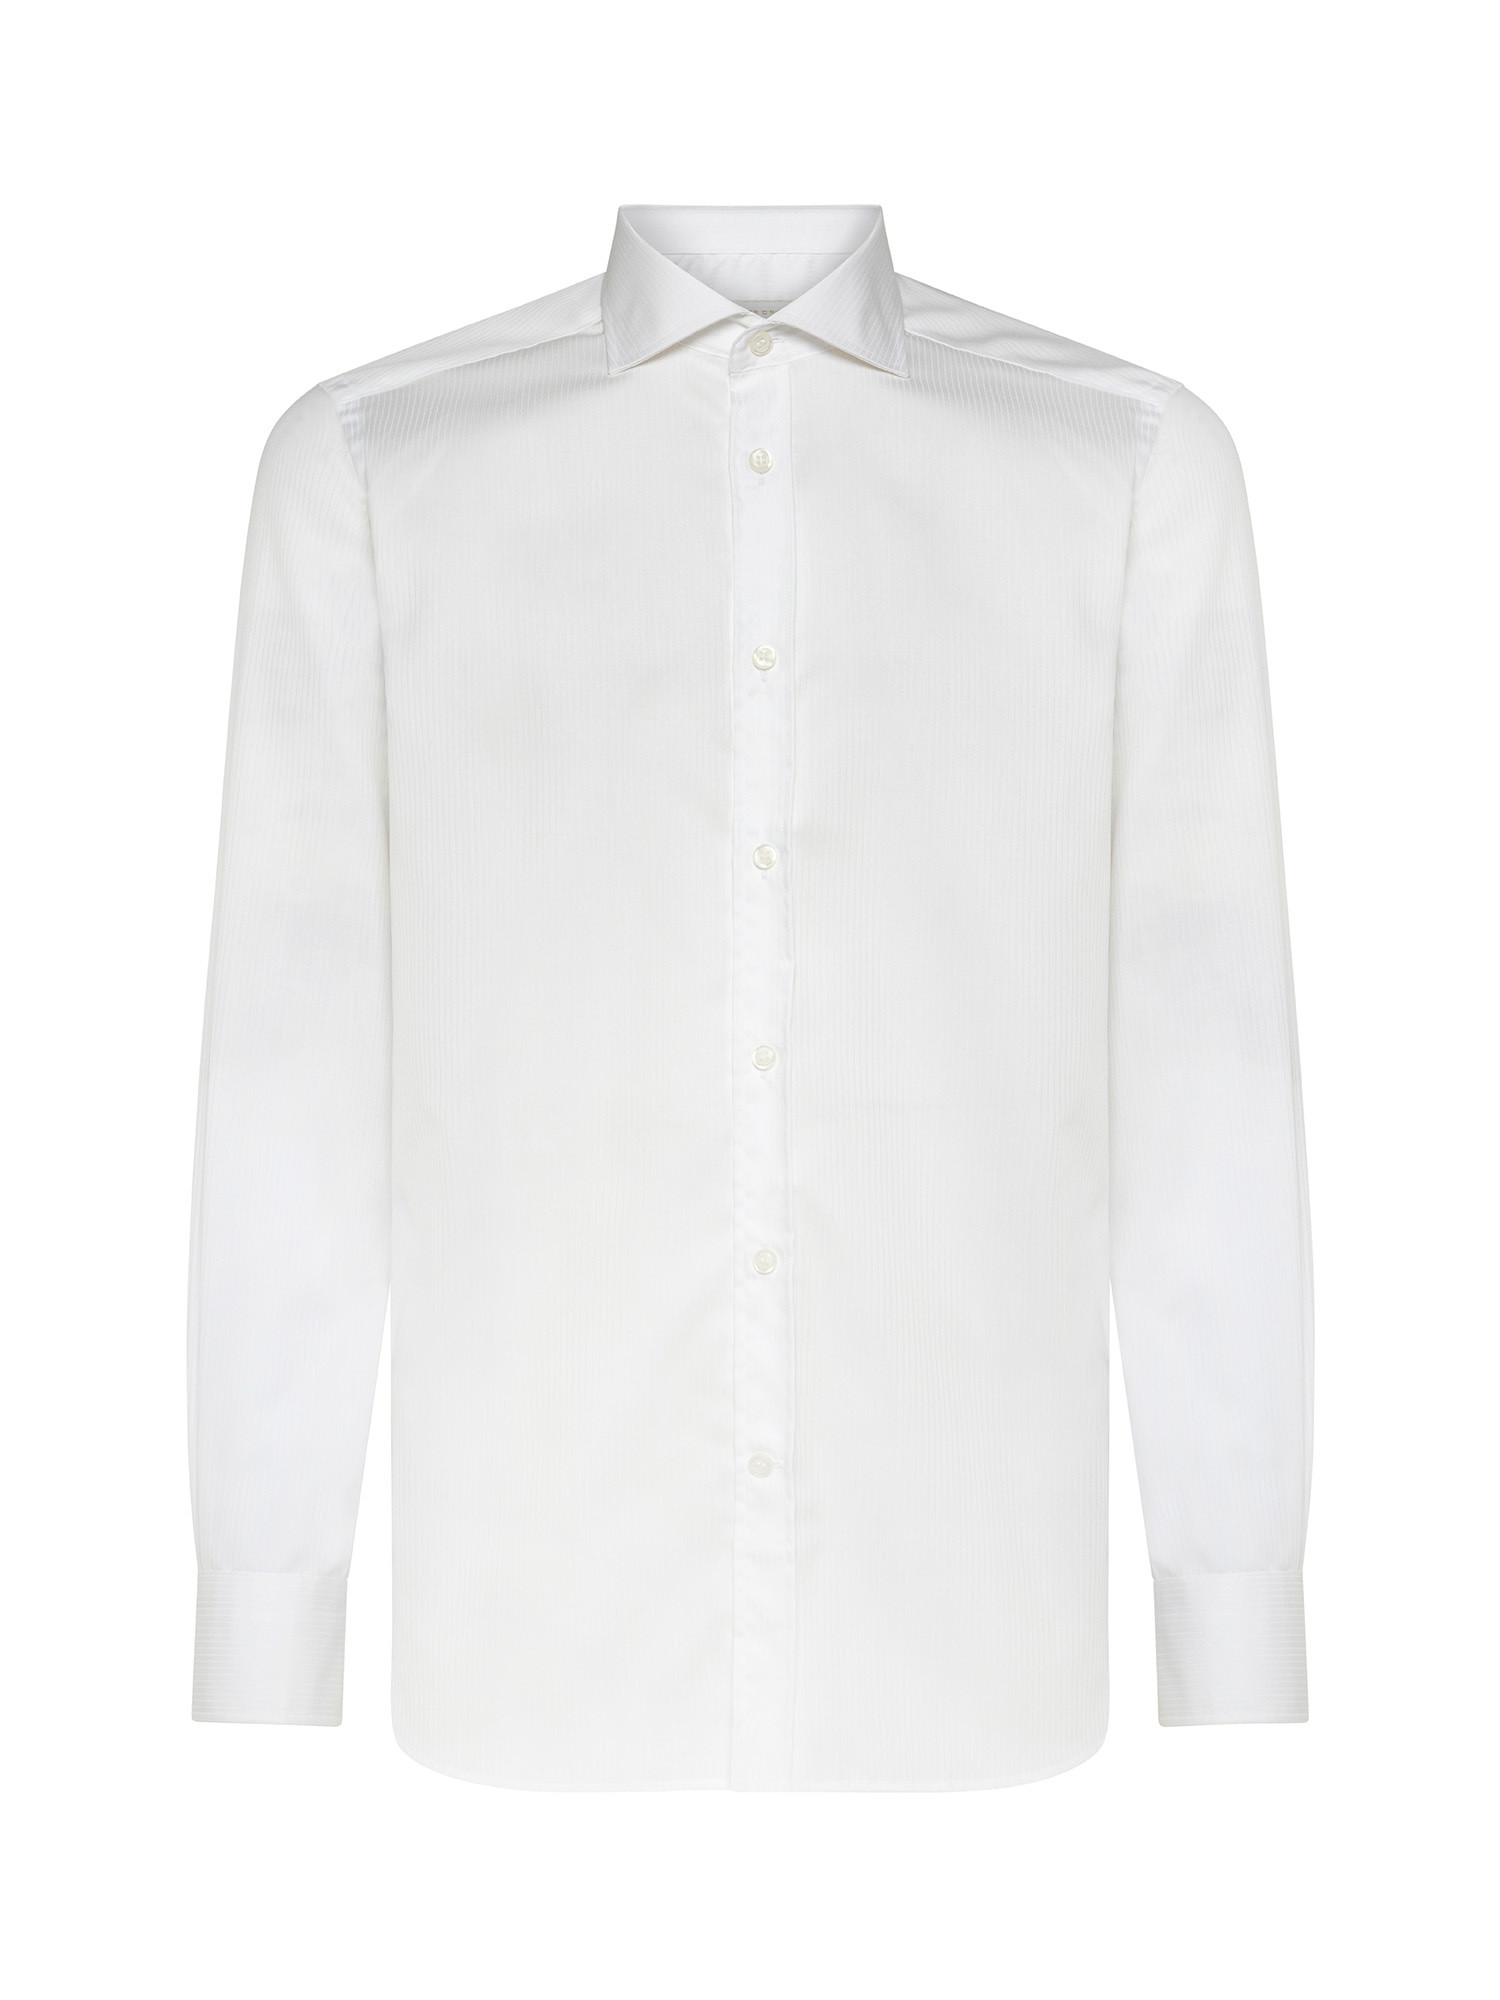 Slim fit shirt in pure cotton, White 3, large image number 1